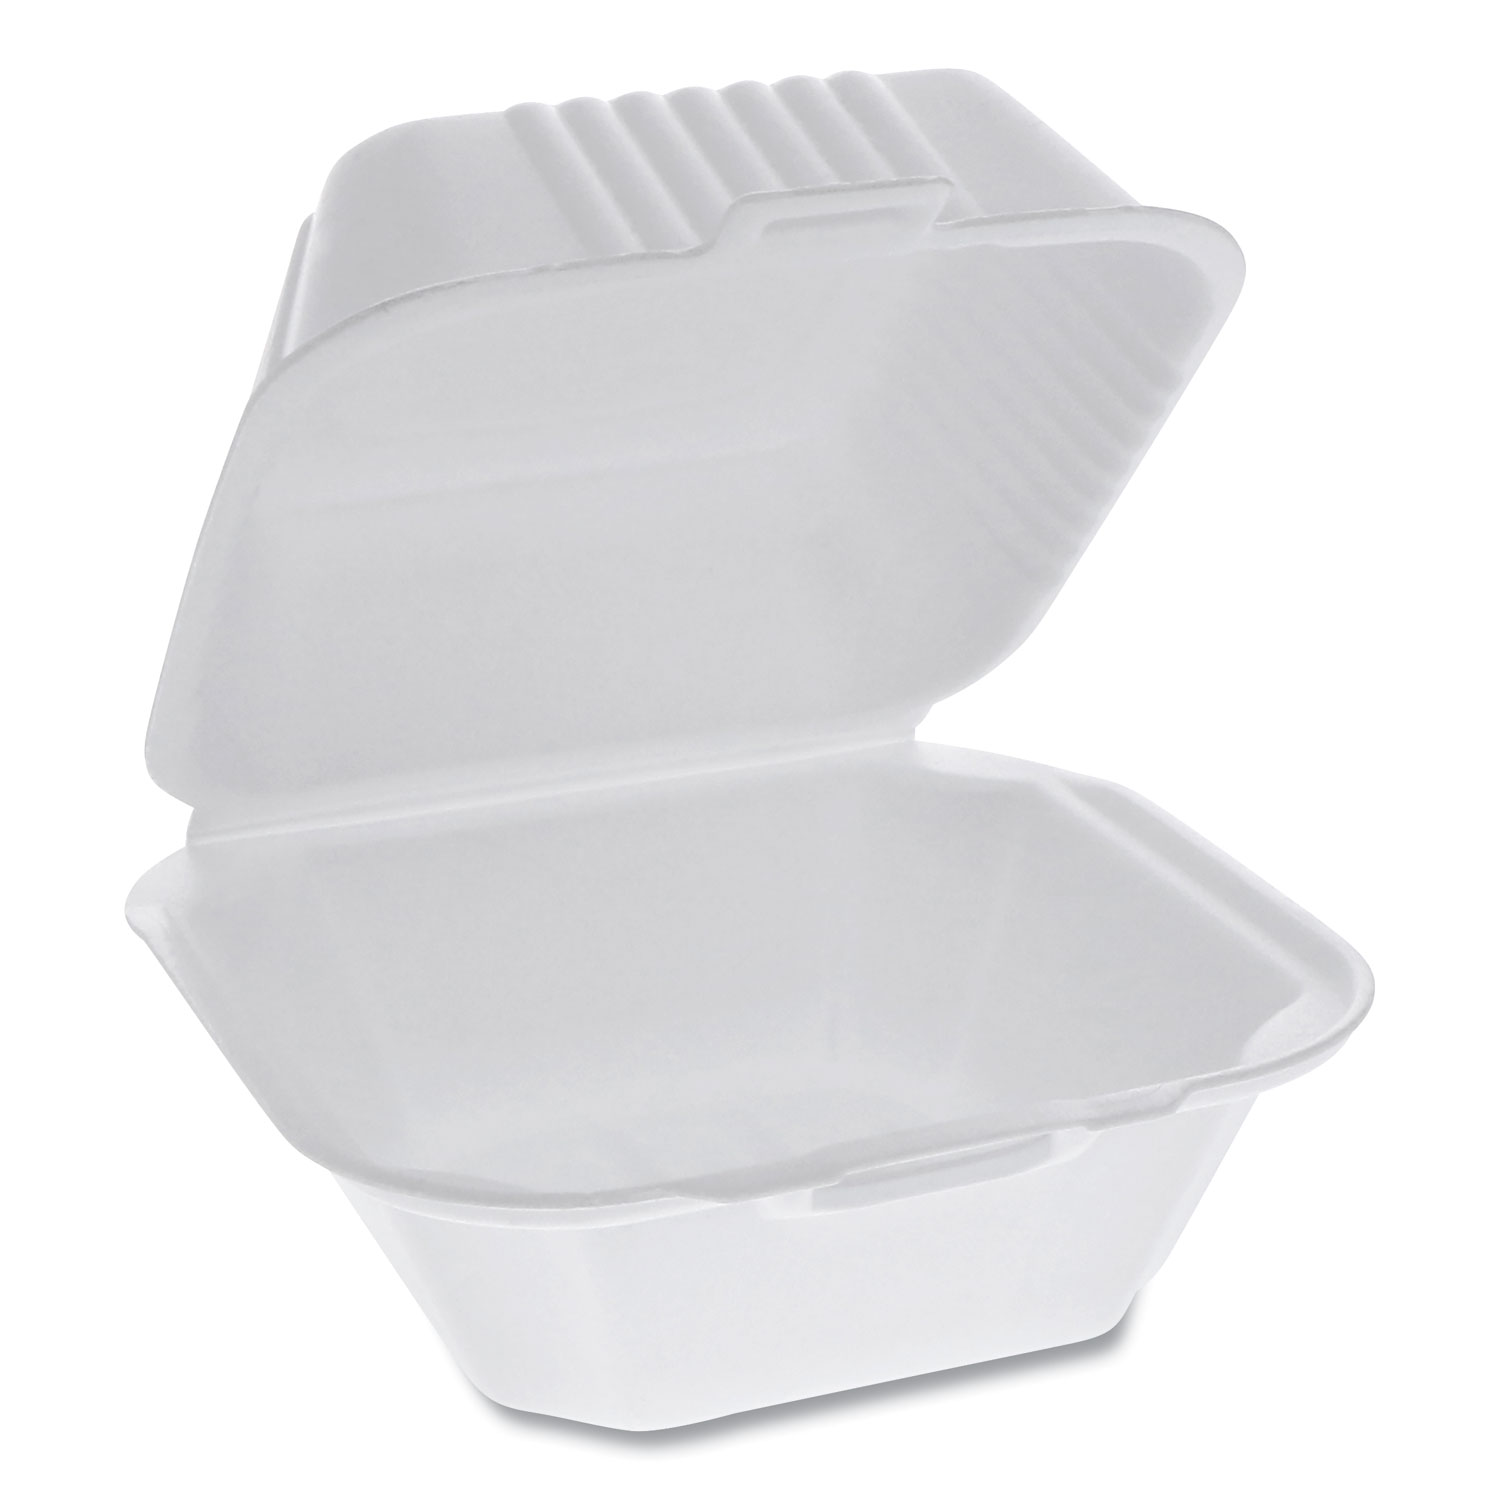 Pactiv Foam Hinged Lid Containers, Sandwich, 5.75 x 5.75 x 3.25, White, 504/Carton